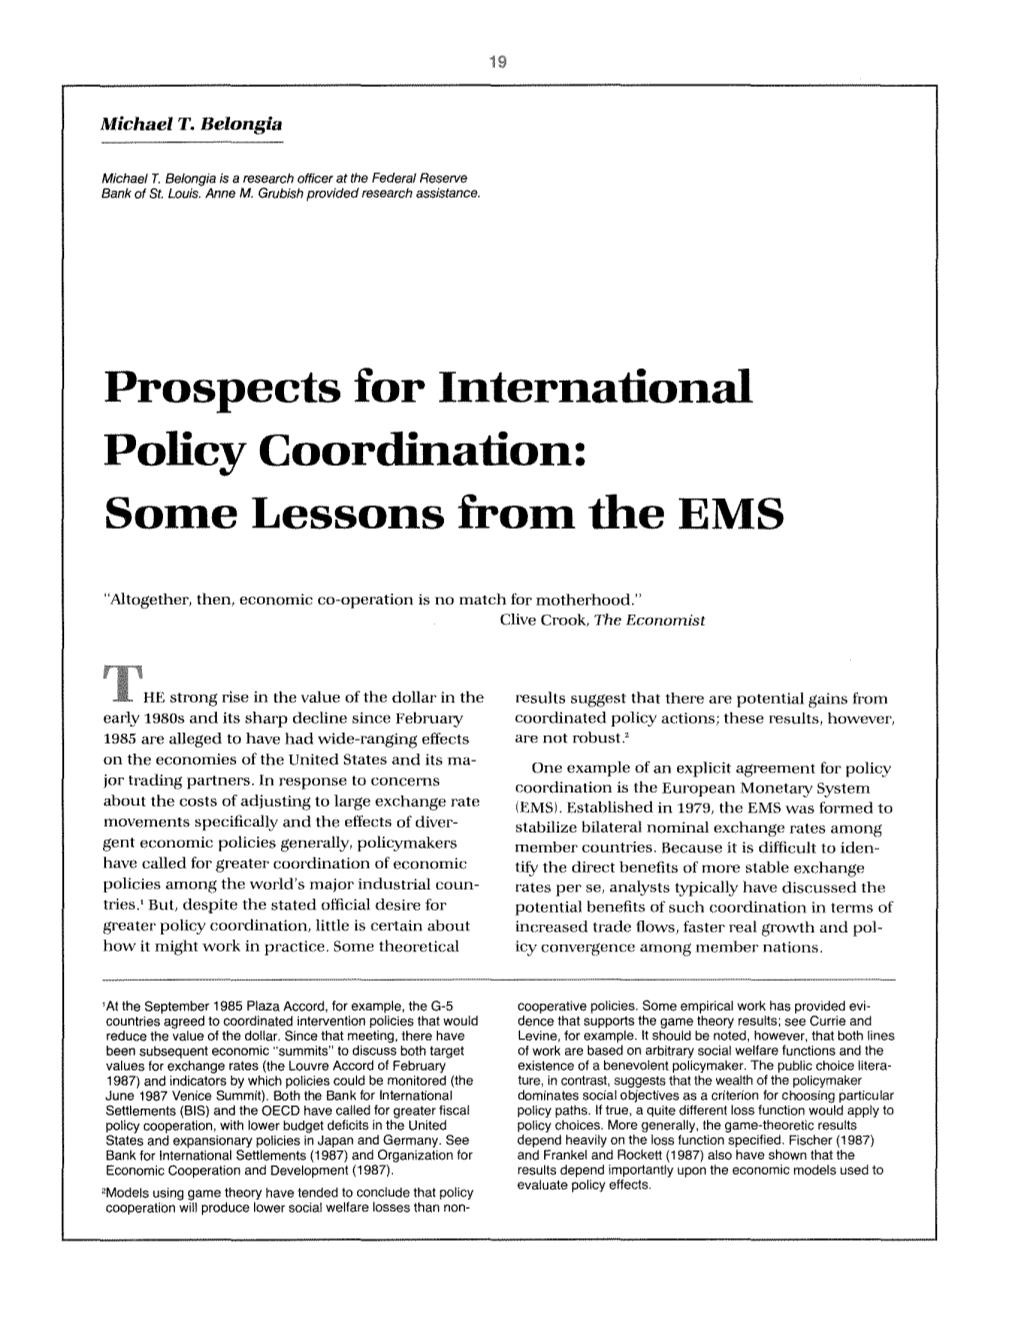 Prospects for International Policy Coordination: Some Lessons from the EMS